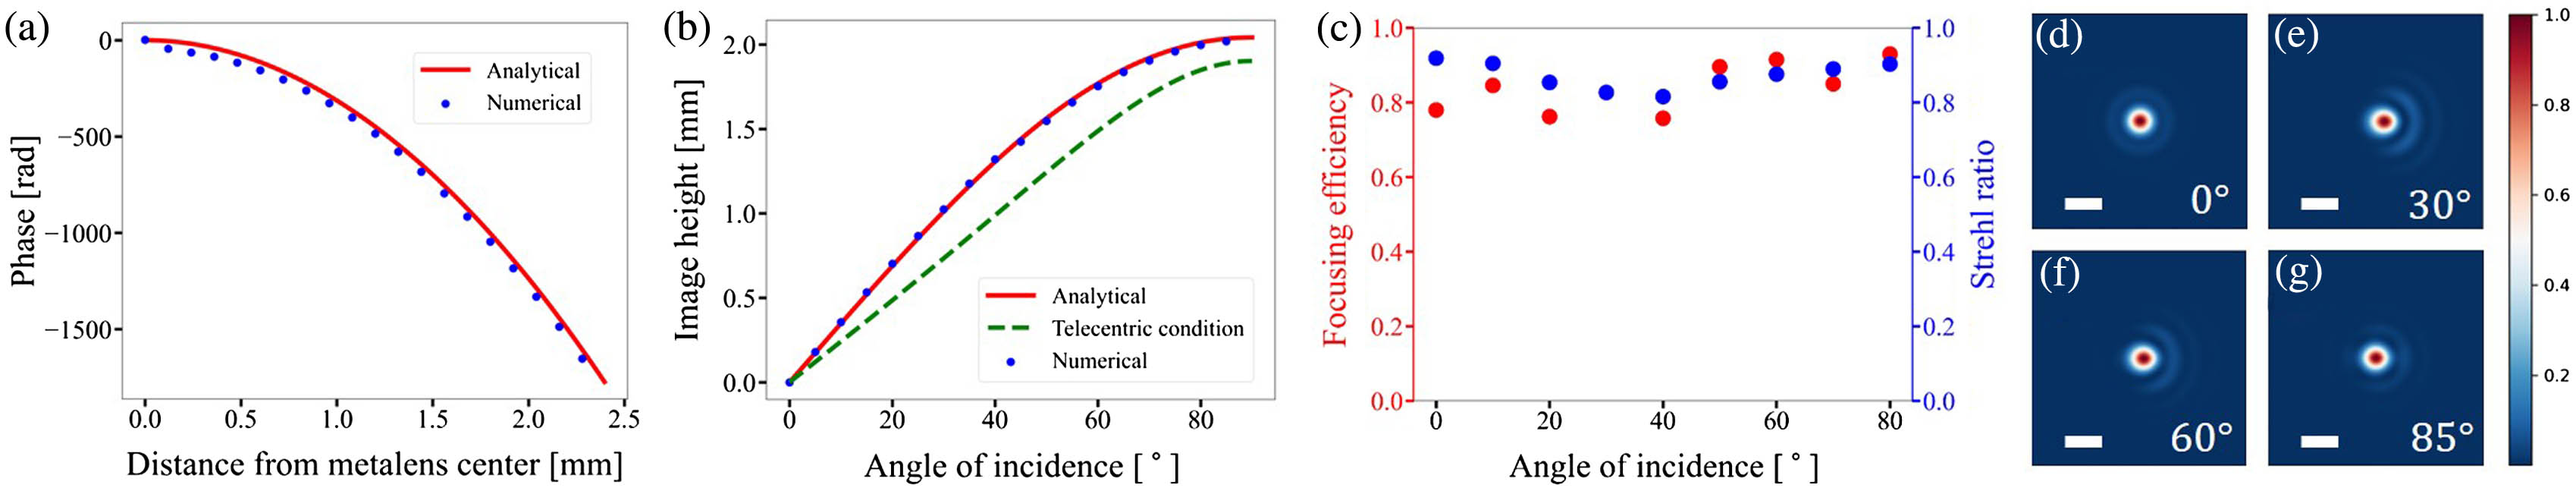 Calculated performance of an ideal WFOV lens. (a) Lens phase profile retrieved from analytical and numerical solutions. (b) Image heights with different AOIs from analytical and numerical solutions. The green dashed line represents the telecentric condition, which corresponds to d=s=Lαn2−sin2 α. (c) Focusing efficiency and Strehl ratio for different AOIs. (d)–(g) Normalized intensity profiles at the image plane with different AOIs (scale bars are 20 µm).